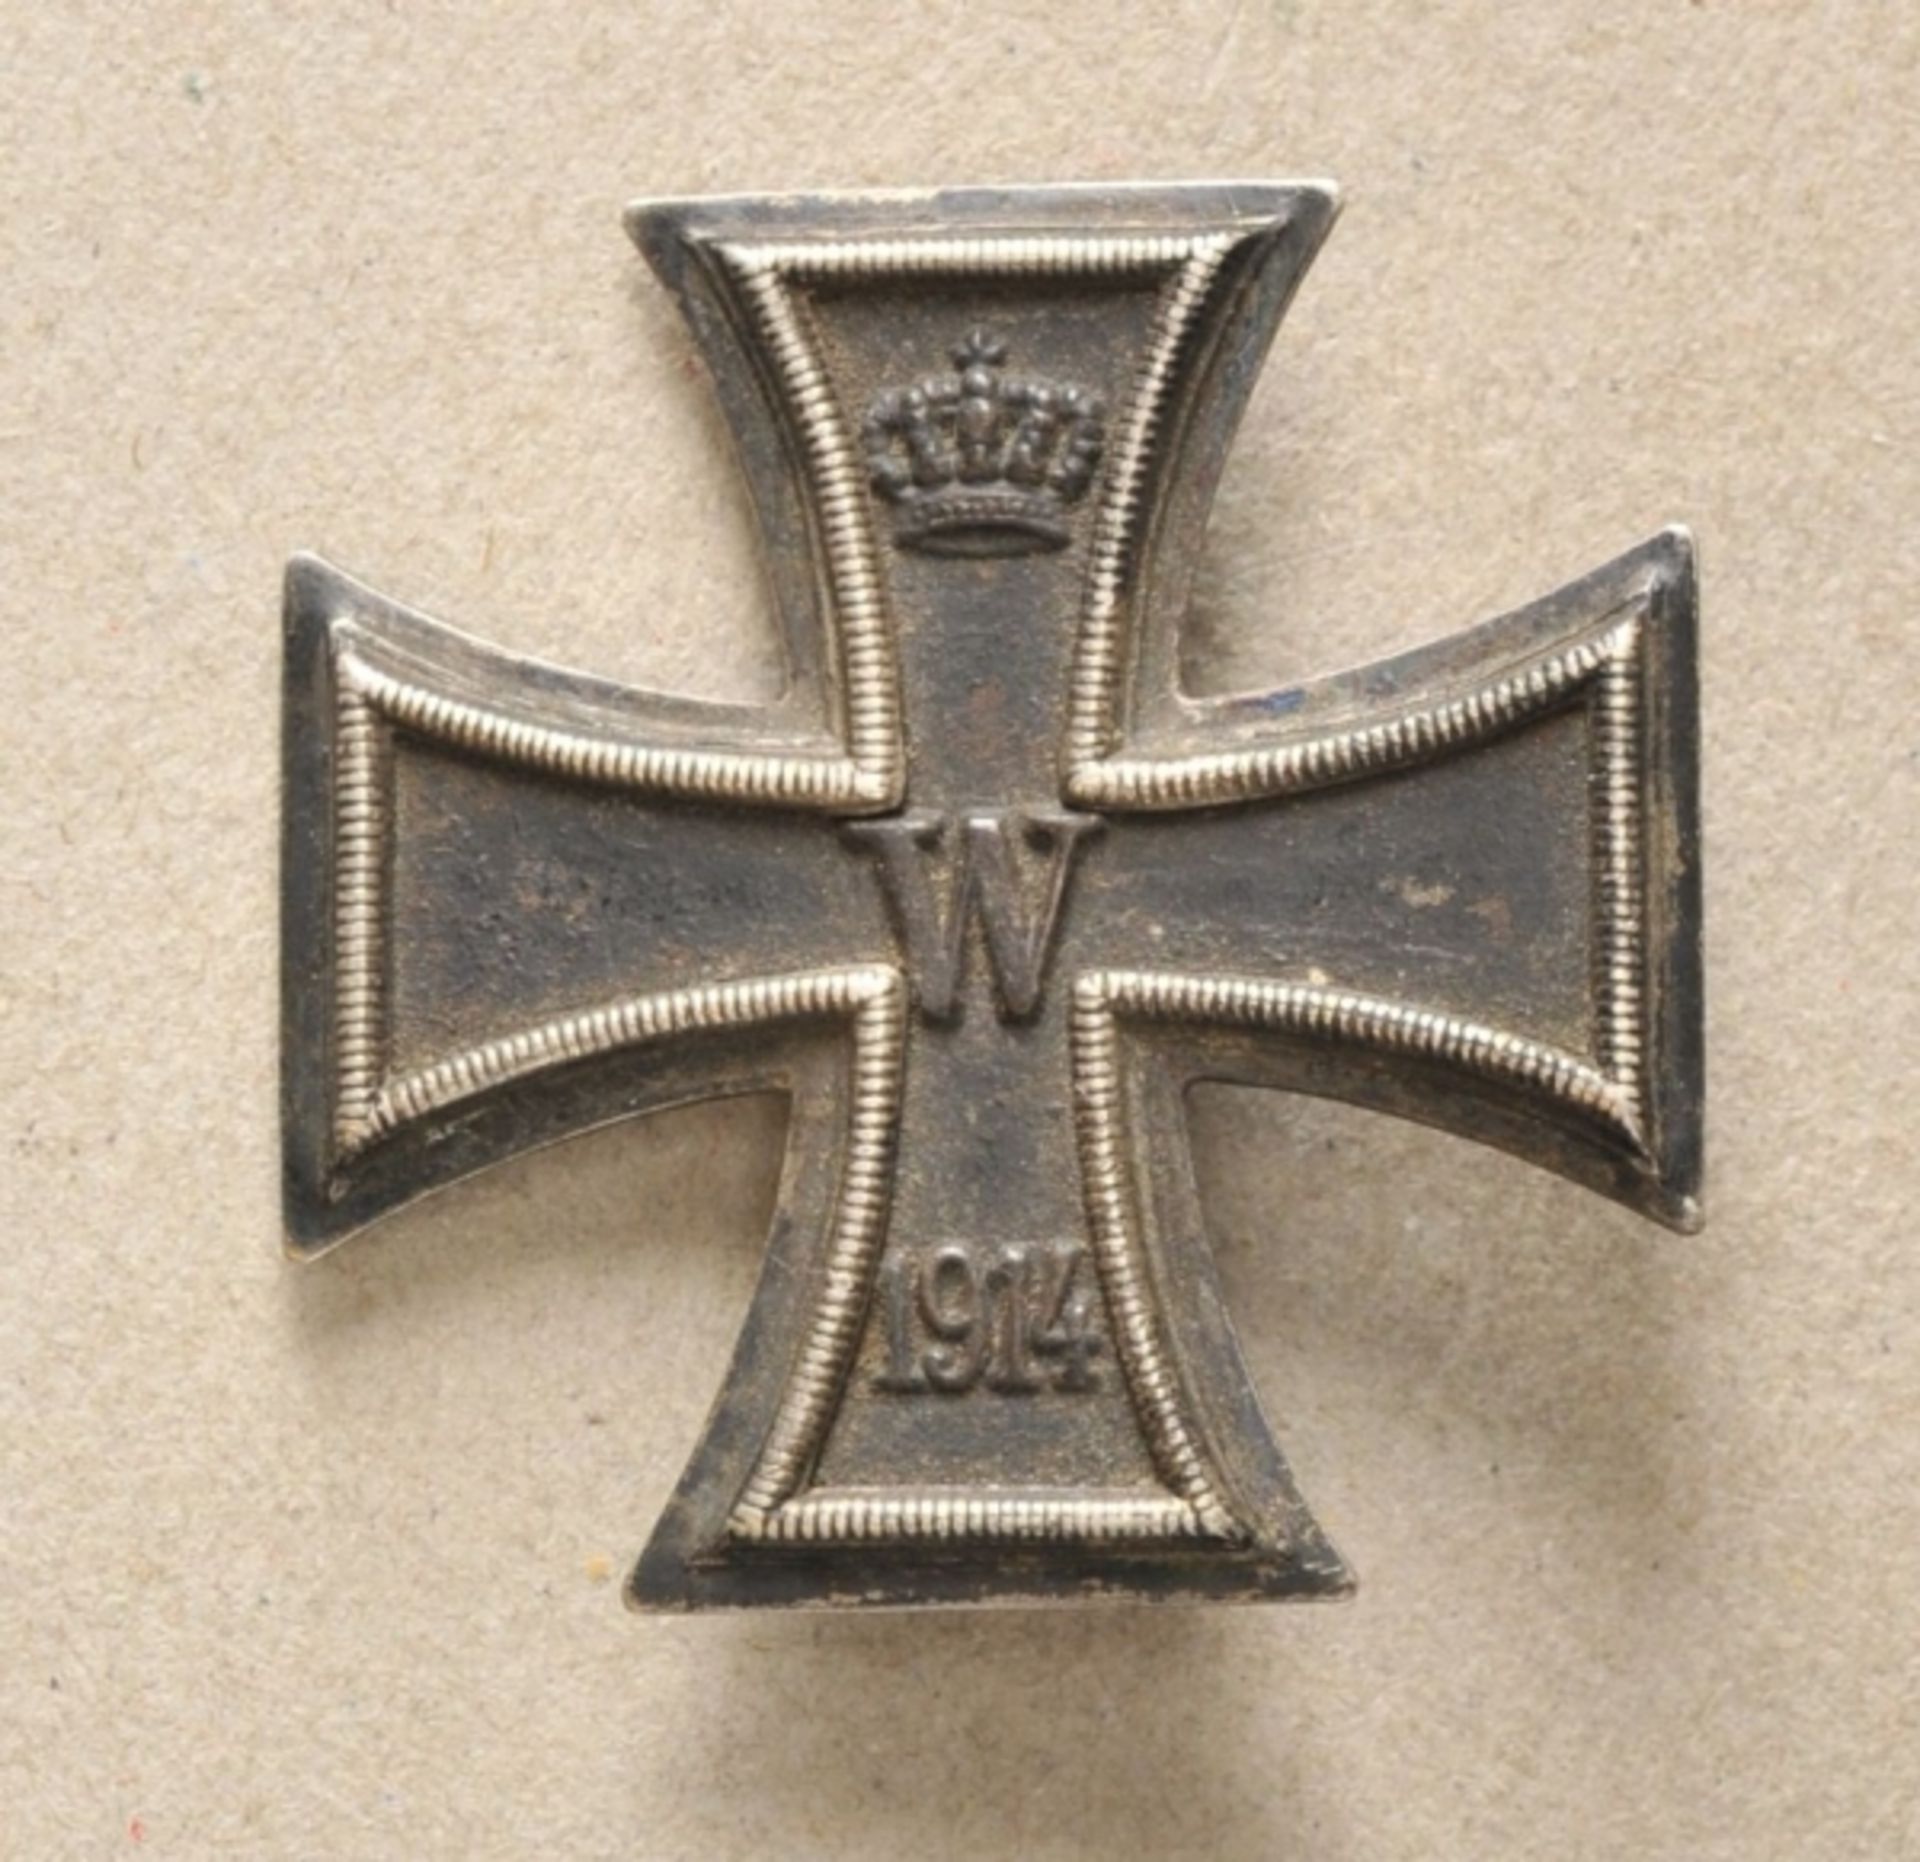 Prussia: Iron Cross, 1914, 1st class. Blackened iron core, silver frame, on needle. Condition: II